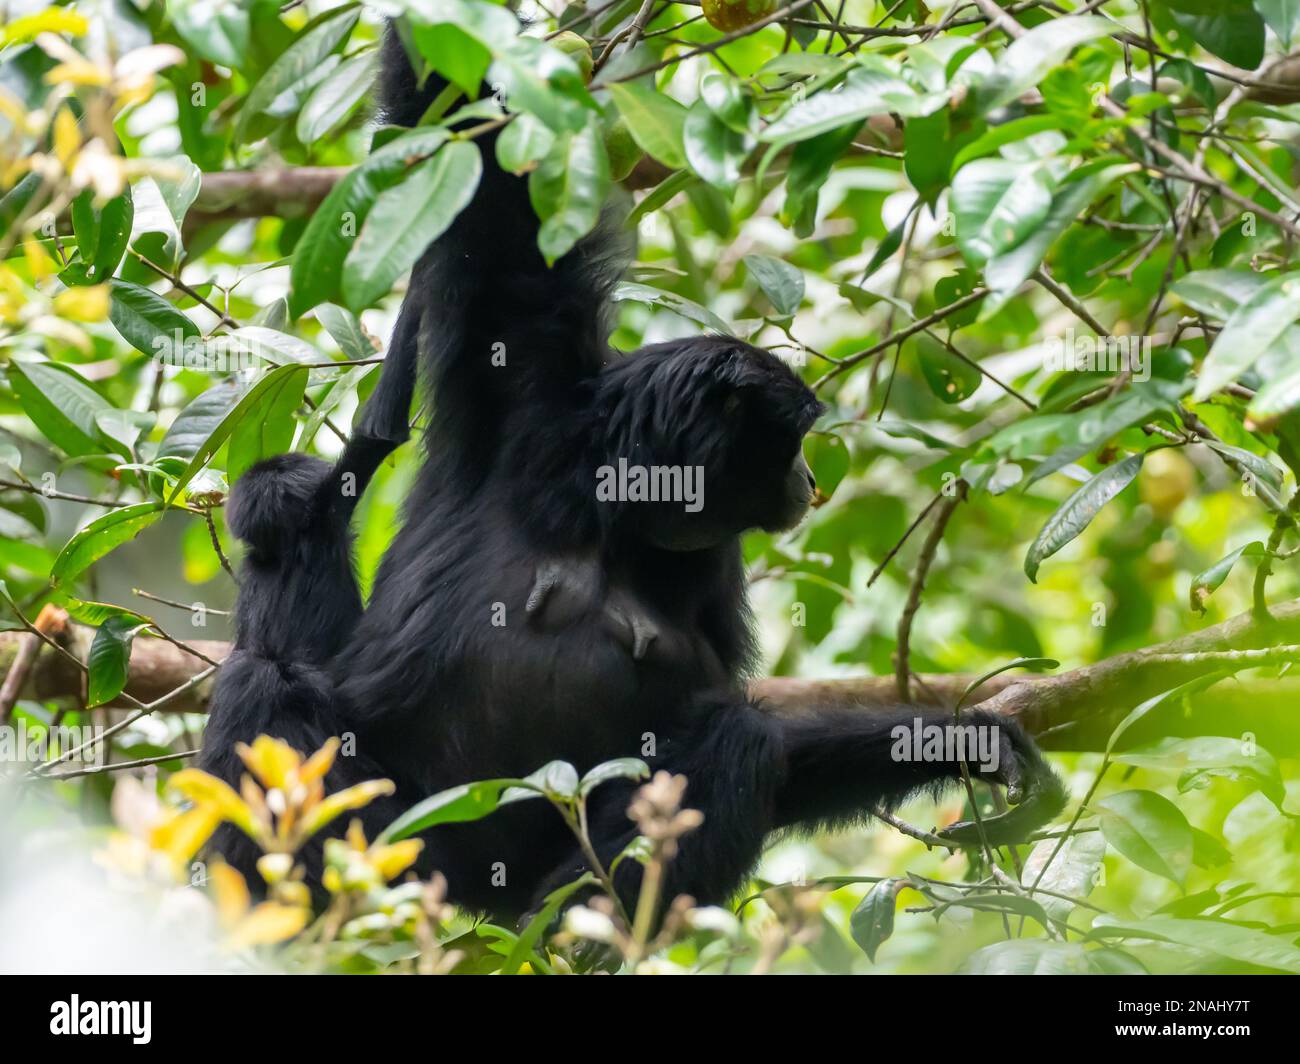 Siamang, Symphalangus syndactylus, the largest of all gibbons, and endangered species found in Malaysia Stock Photo